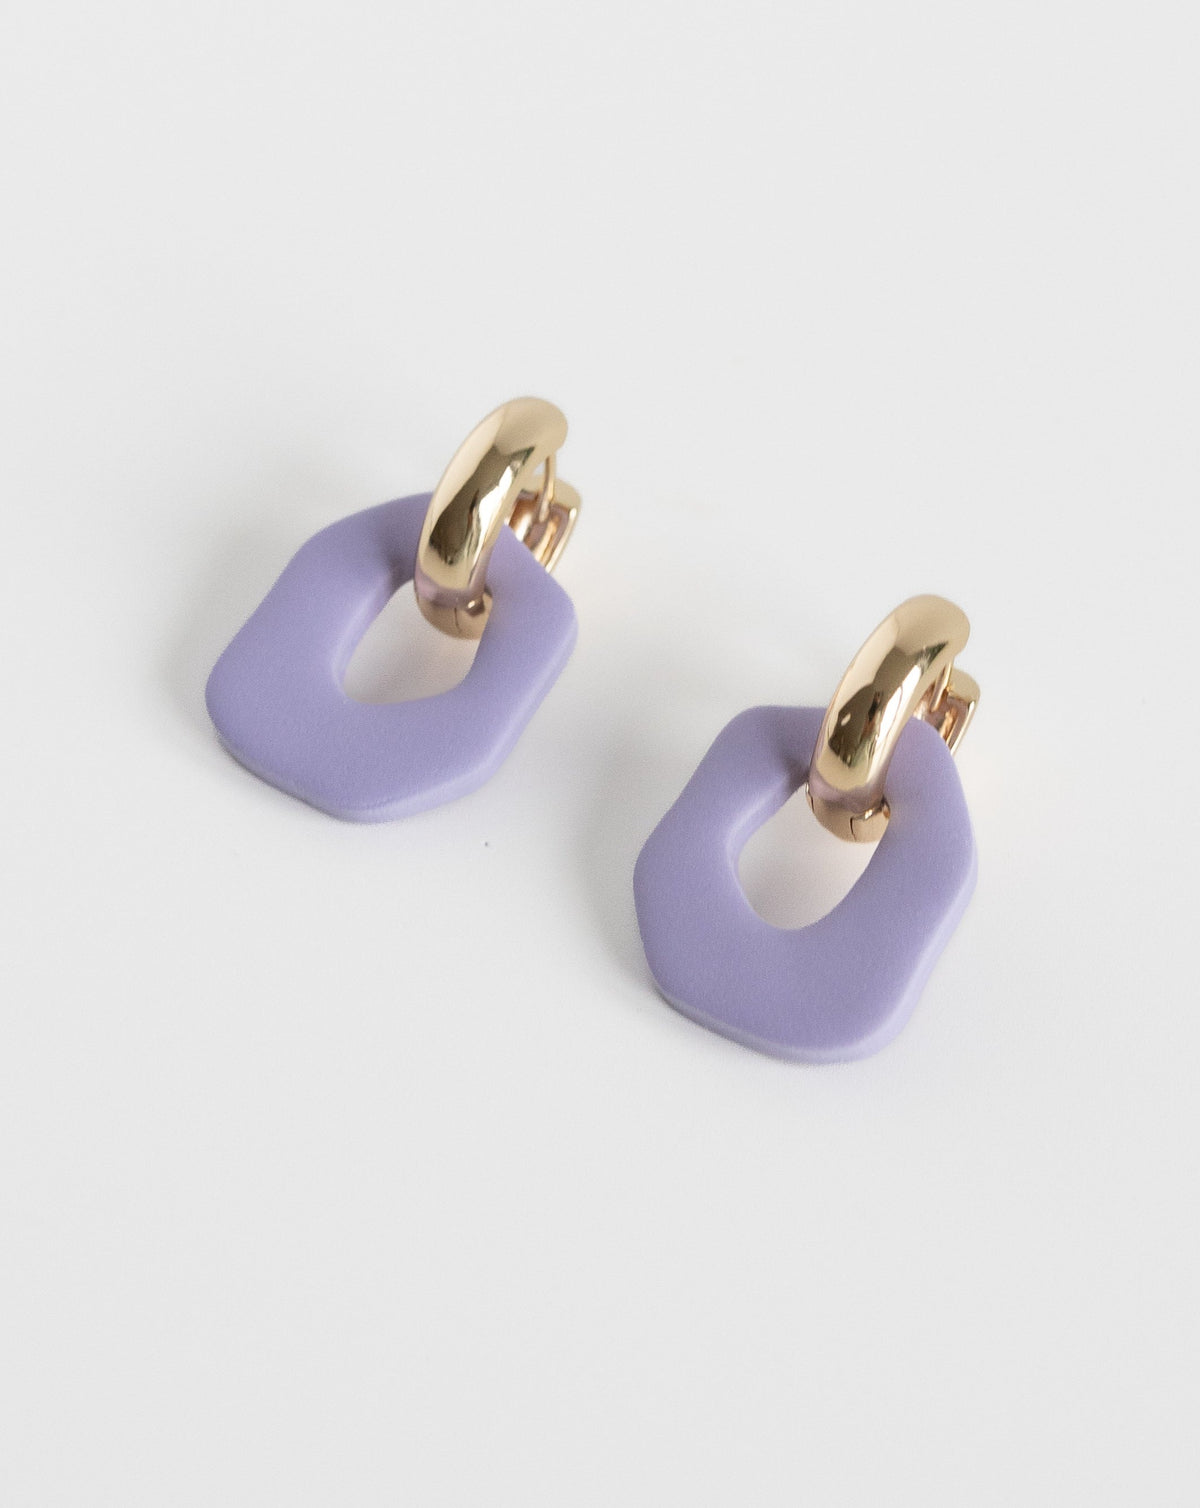 Darien earrings in Lilac color with gold hoops, side view